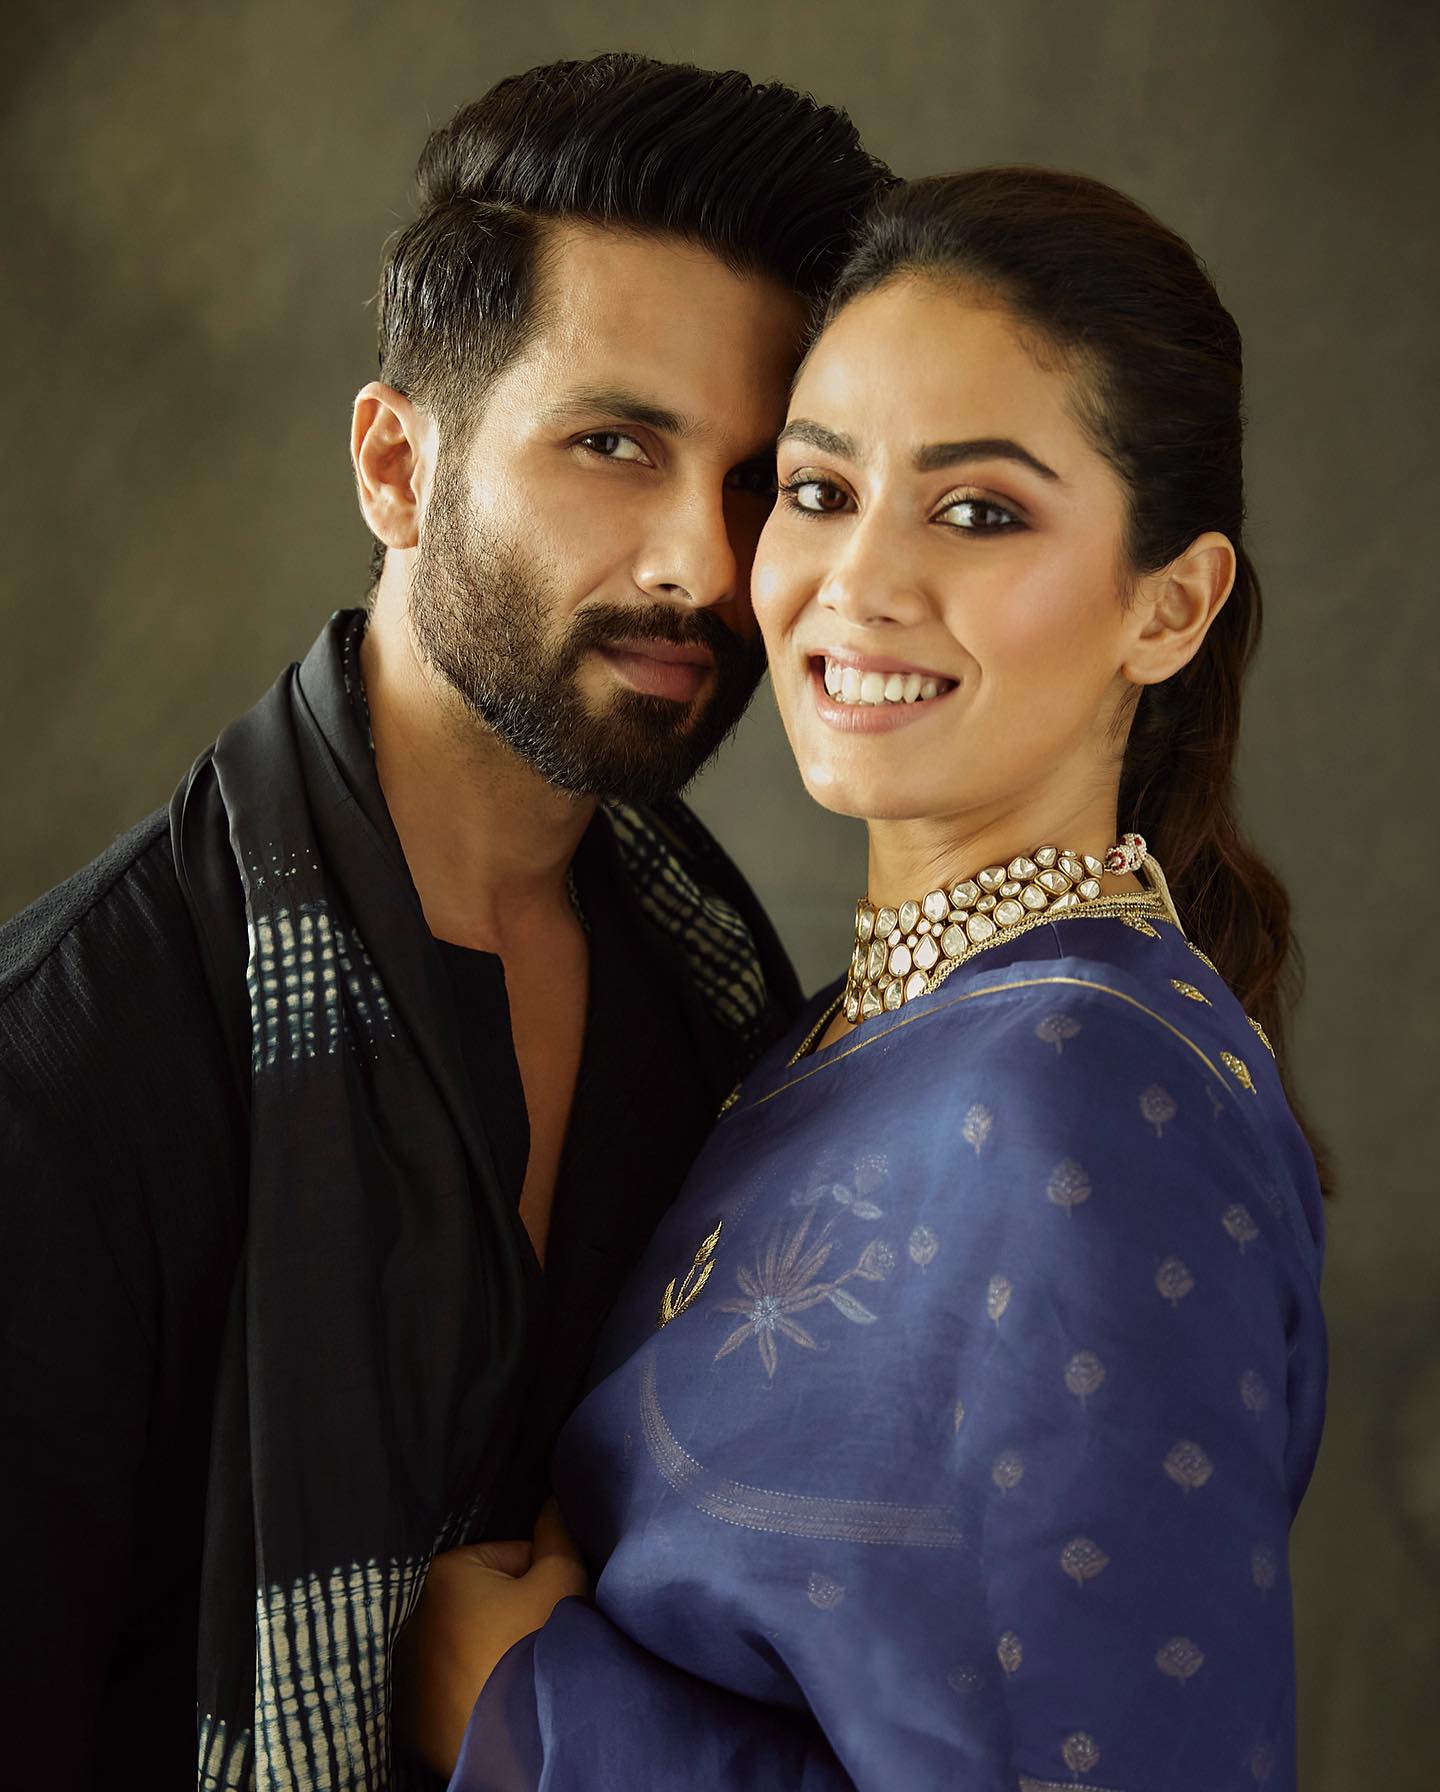 Couple Goals! Shahid Kapoor and Mira go mushy together on latter’s birthday 849593